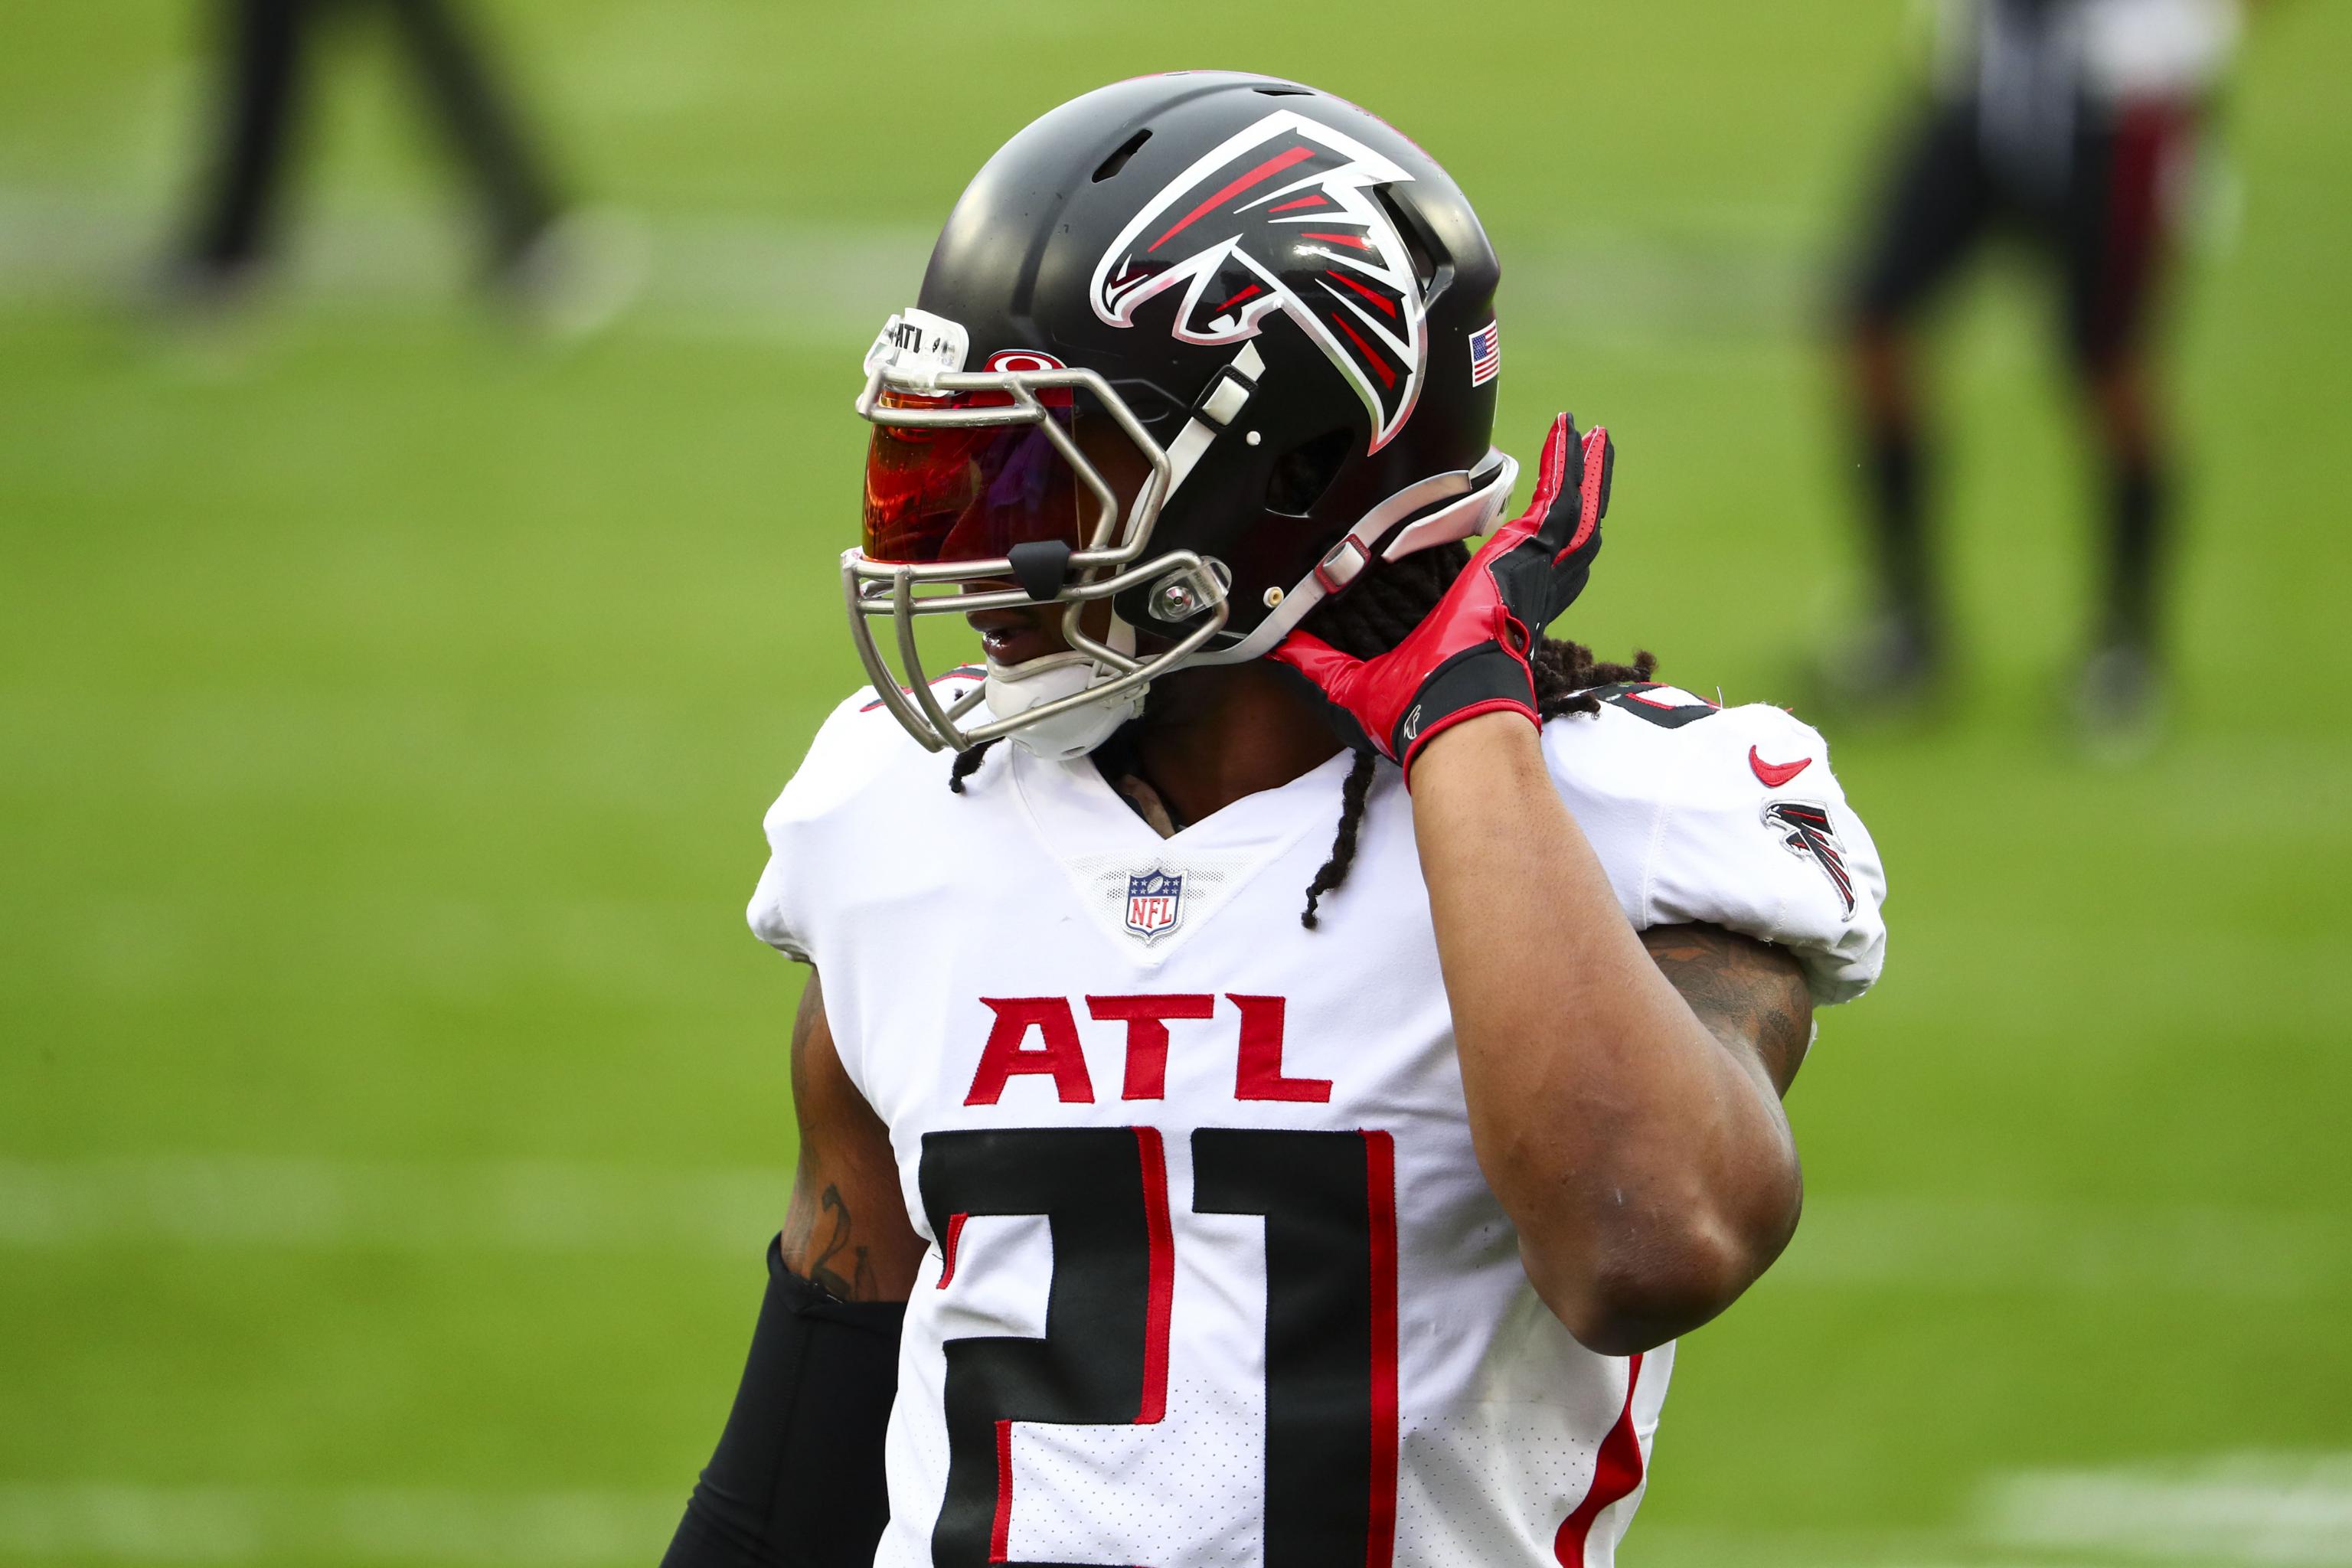 Falcons over/under: How many touchdowns will Todd Gurley score in